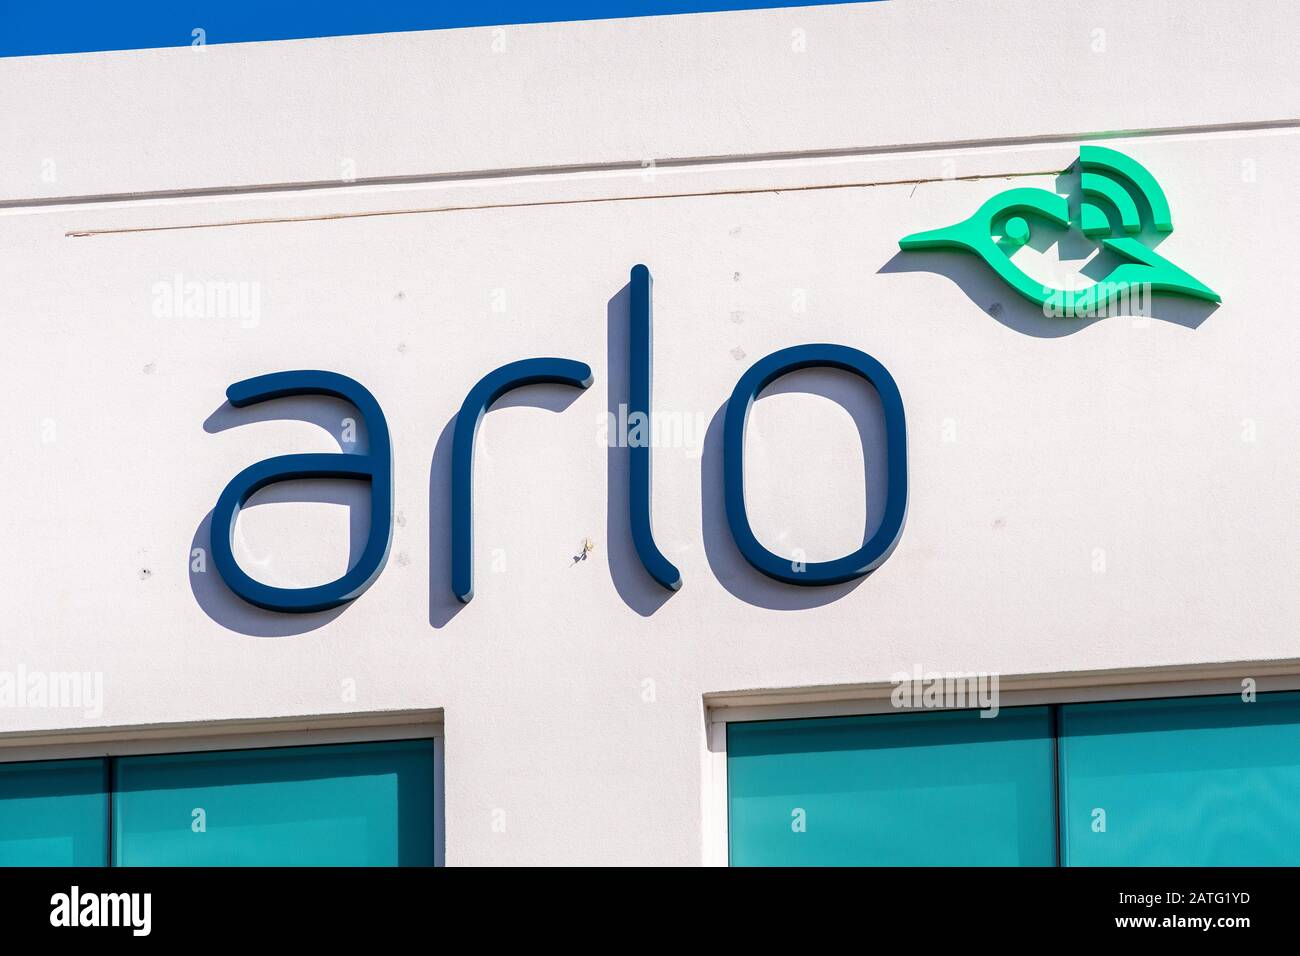 Jan 31, 2020 San Jose / CA / USA - Arlo Technologies logo at the Company's headquarters in Silicon Valley; Arlo Technologies, Inc is a home automation Stock Photo